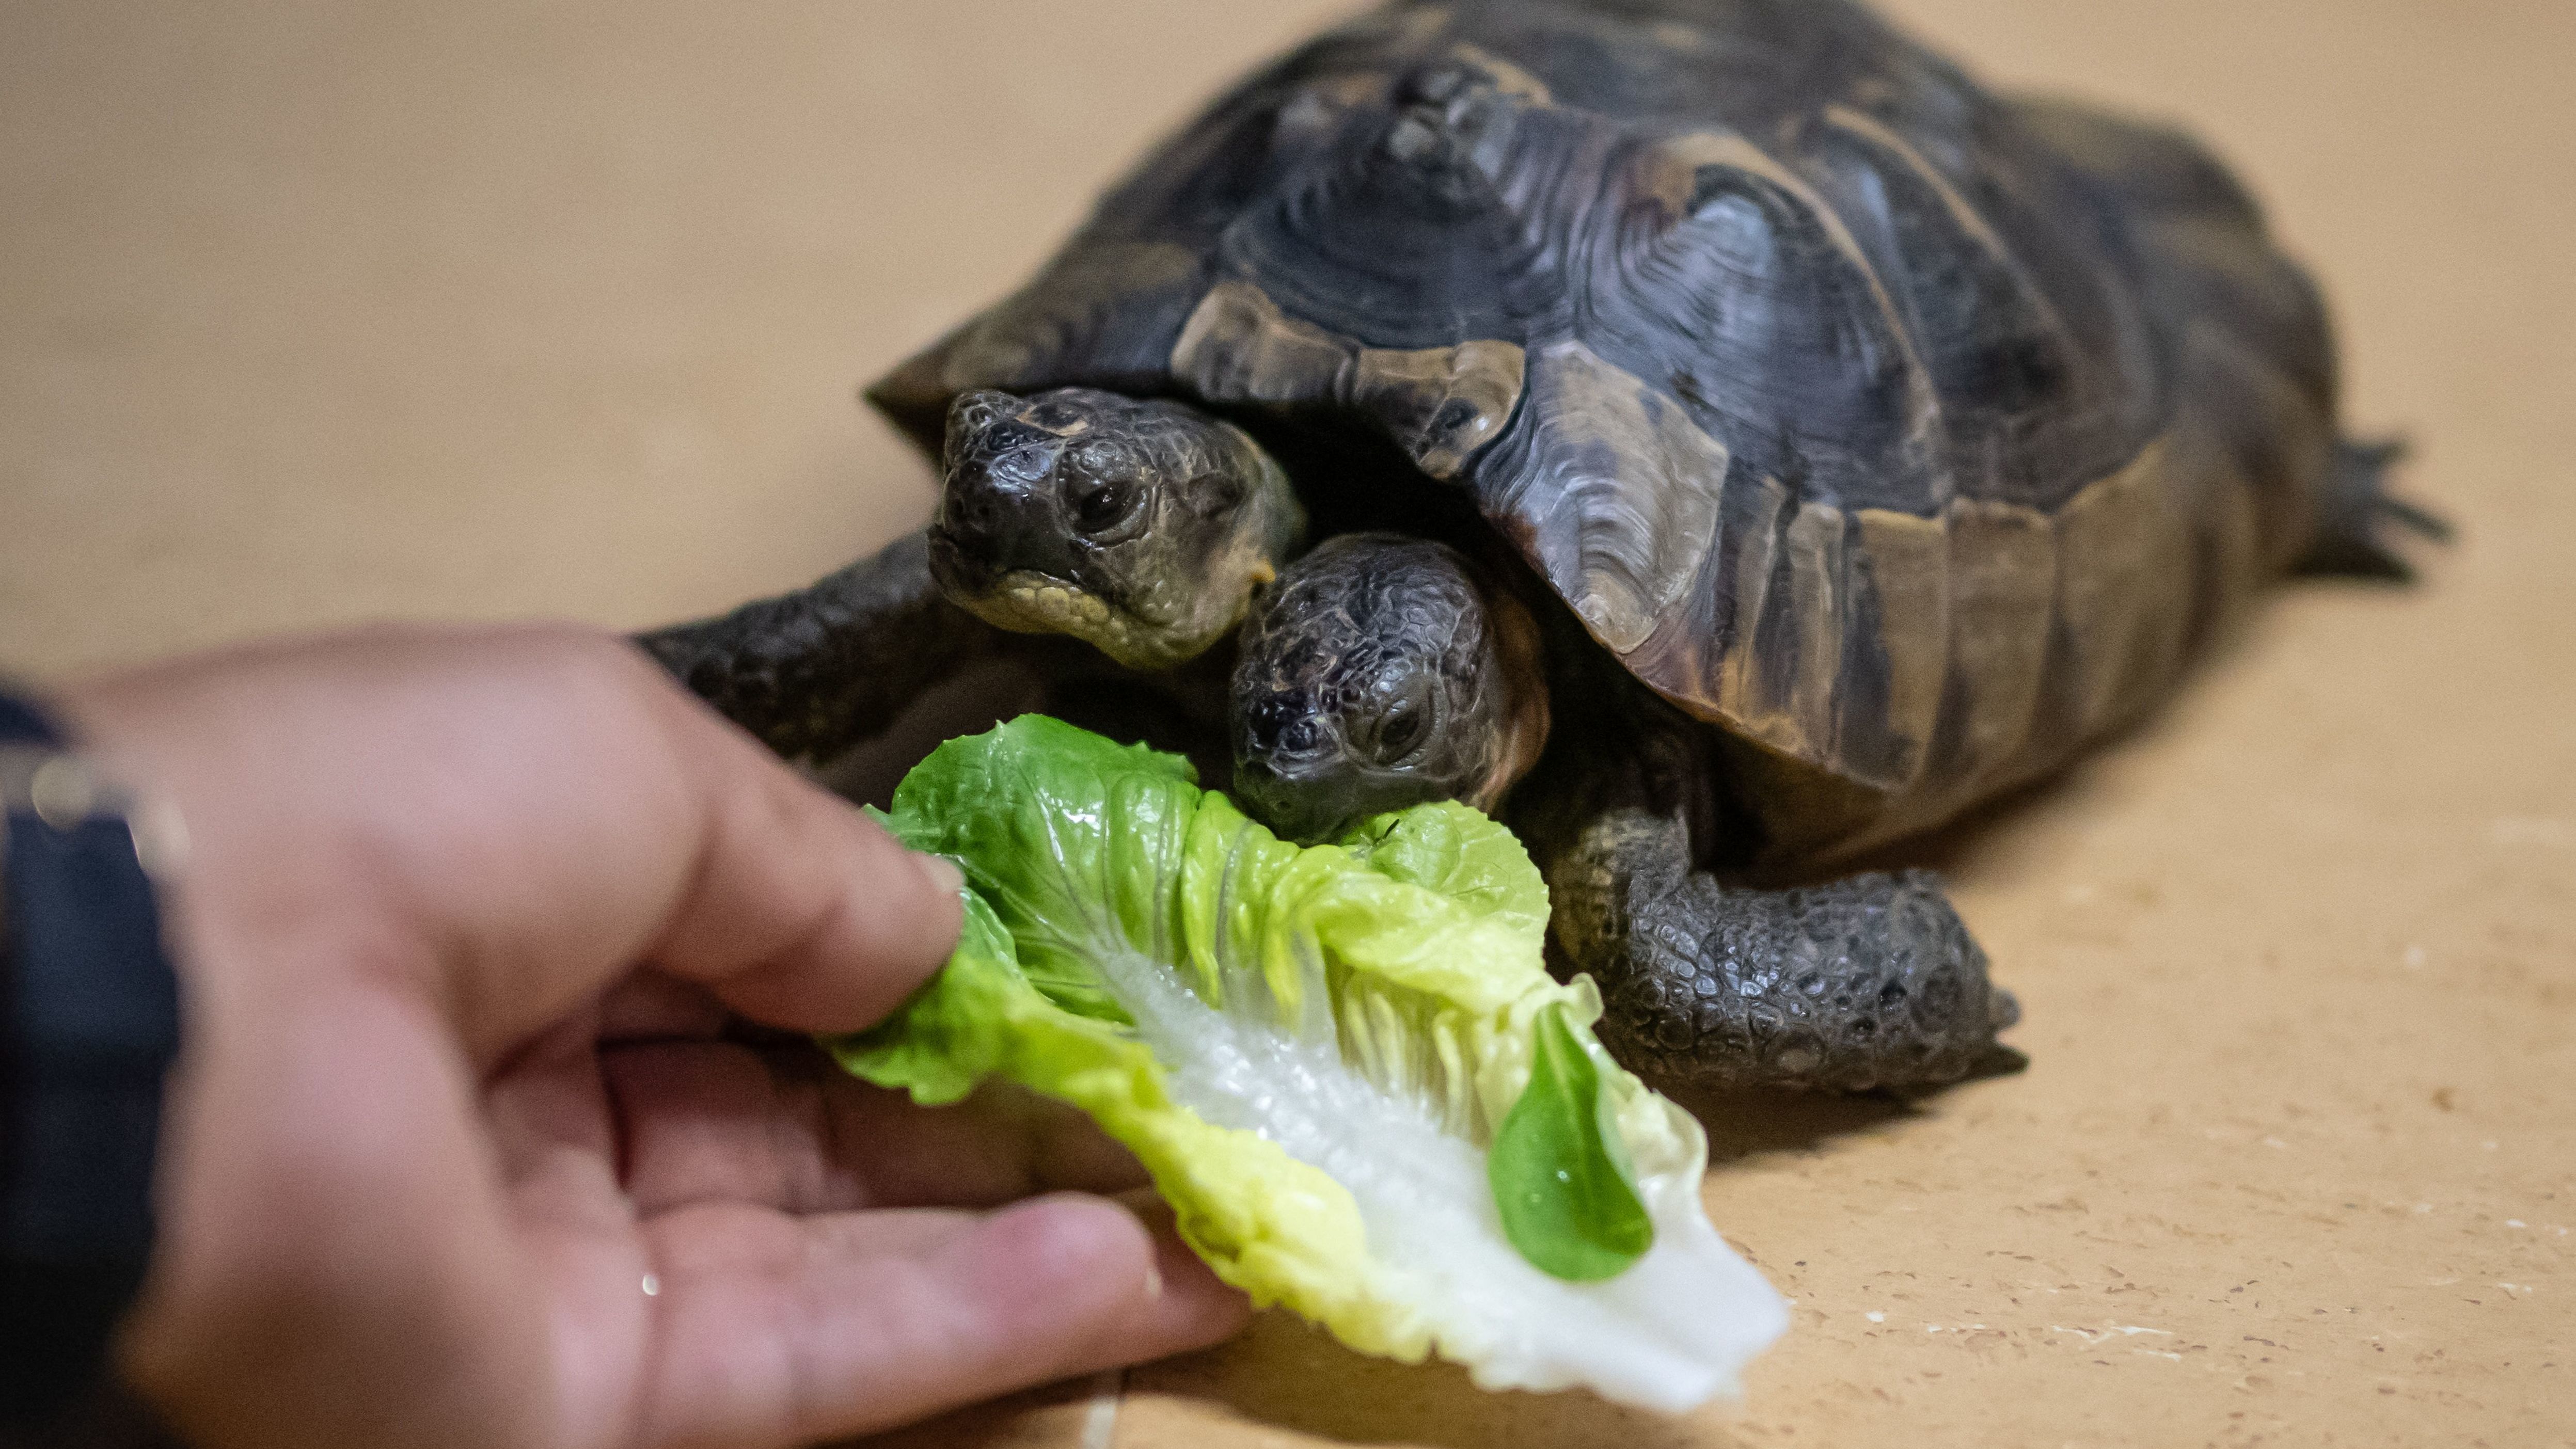 Janus, a two-headed Greek tortoise, enjoys salad for his 25th birthday on Saturday, September 3. Janus lives at the Geneva Museum of Natural History in Switzerland.